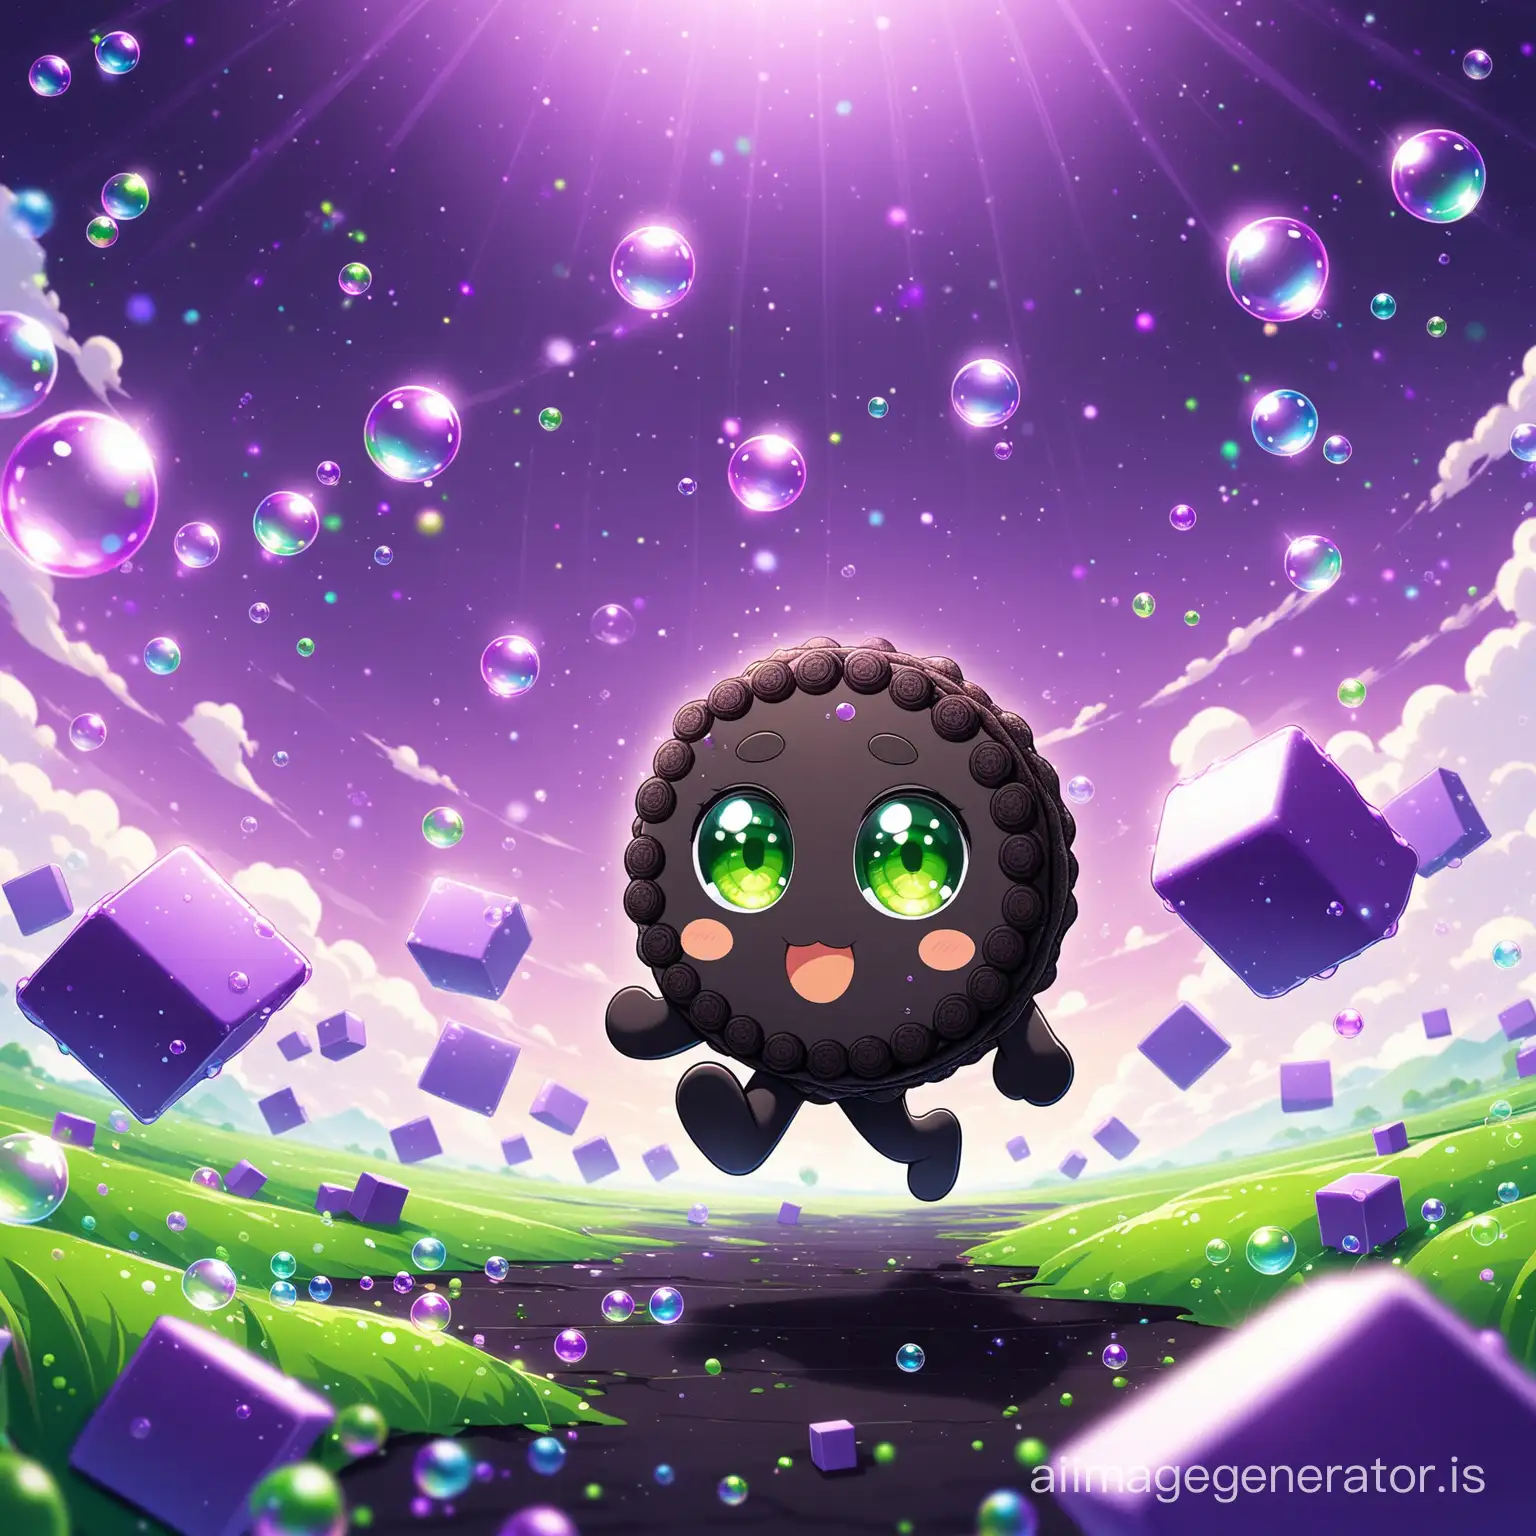 a happy black cookie with green eyes walking in the land of Bubbles
Bubbles are scattered in the environment
also little purple blocks fell on the floor
Details are evident beautifully and with great precision
